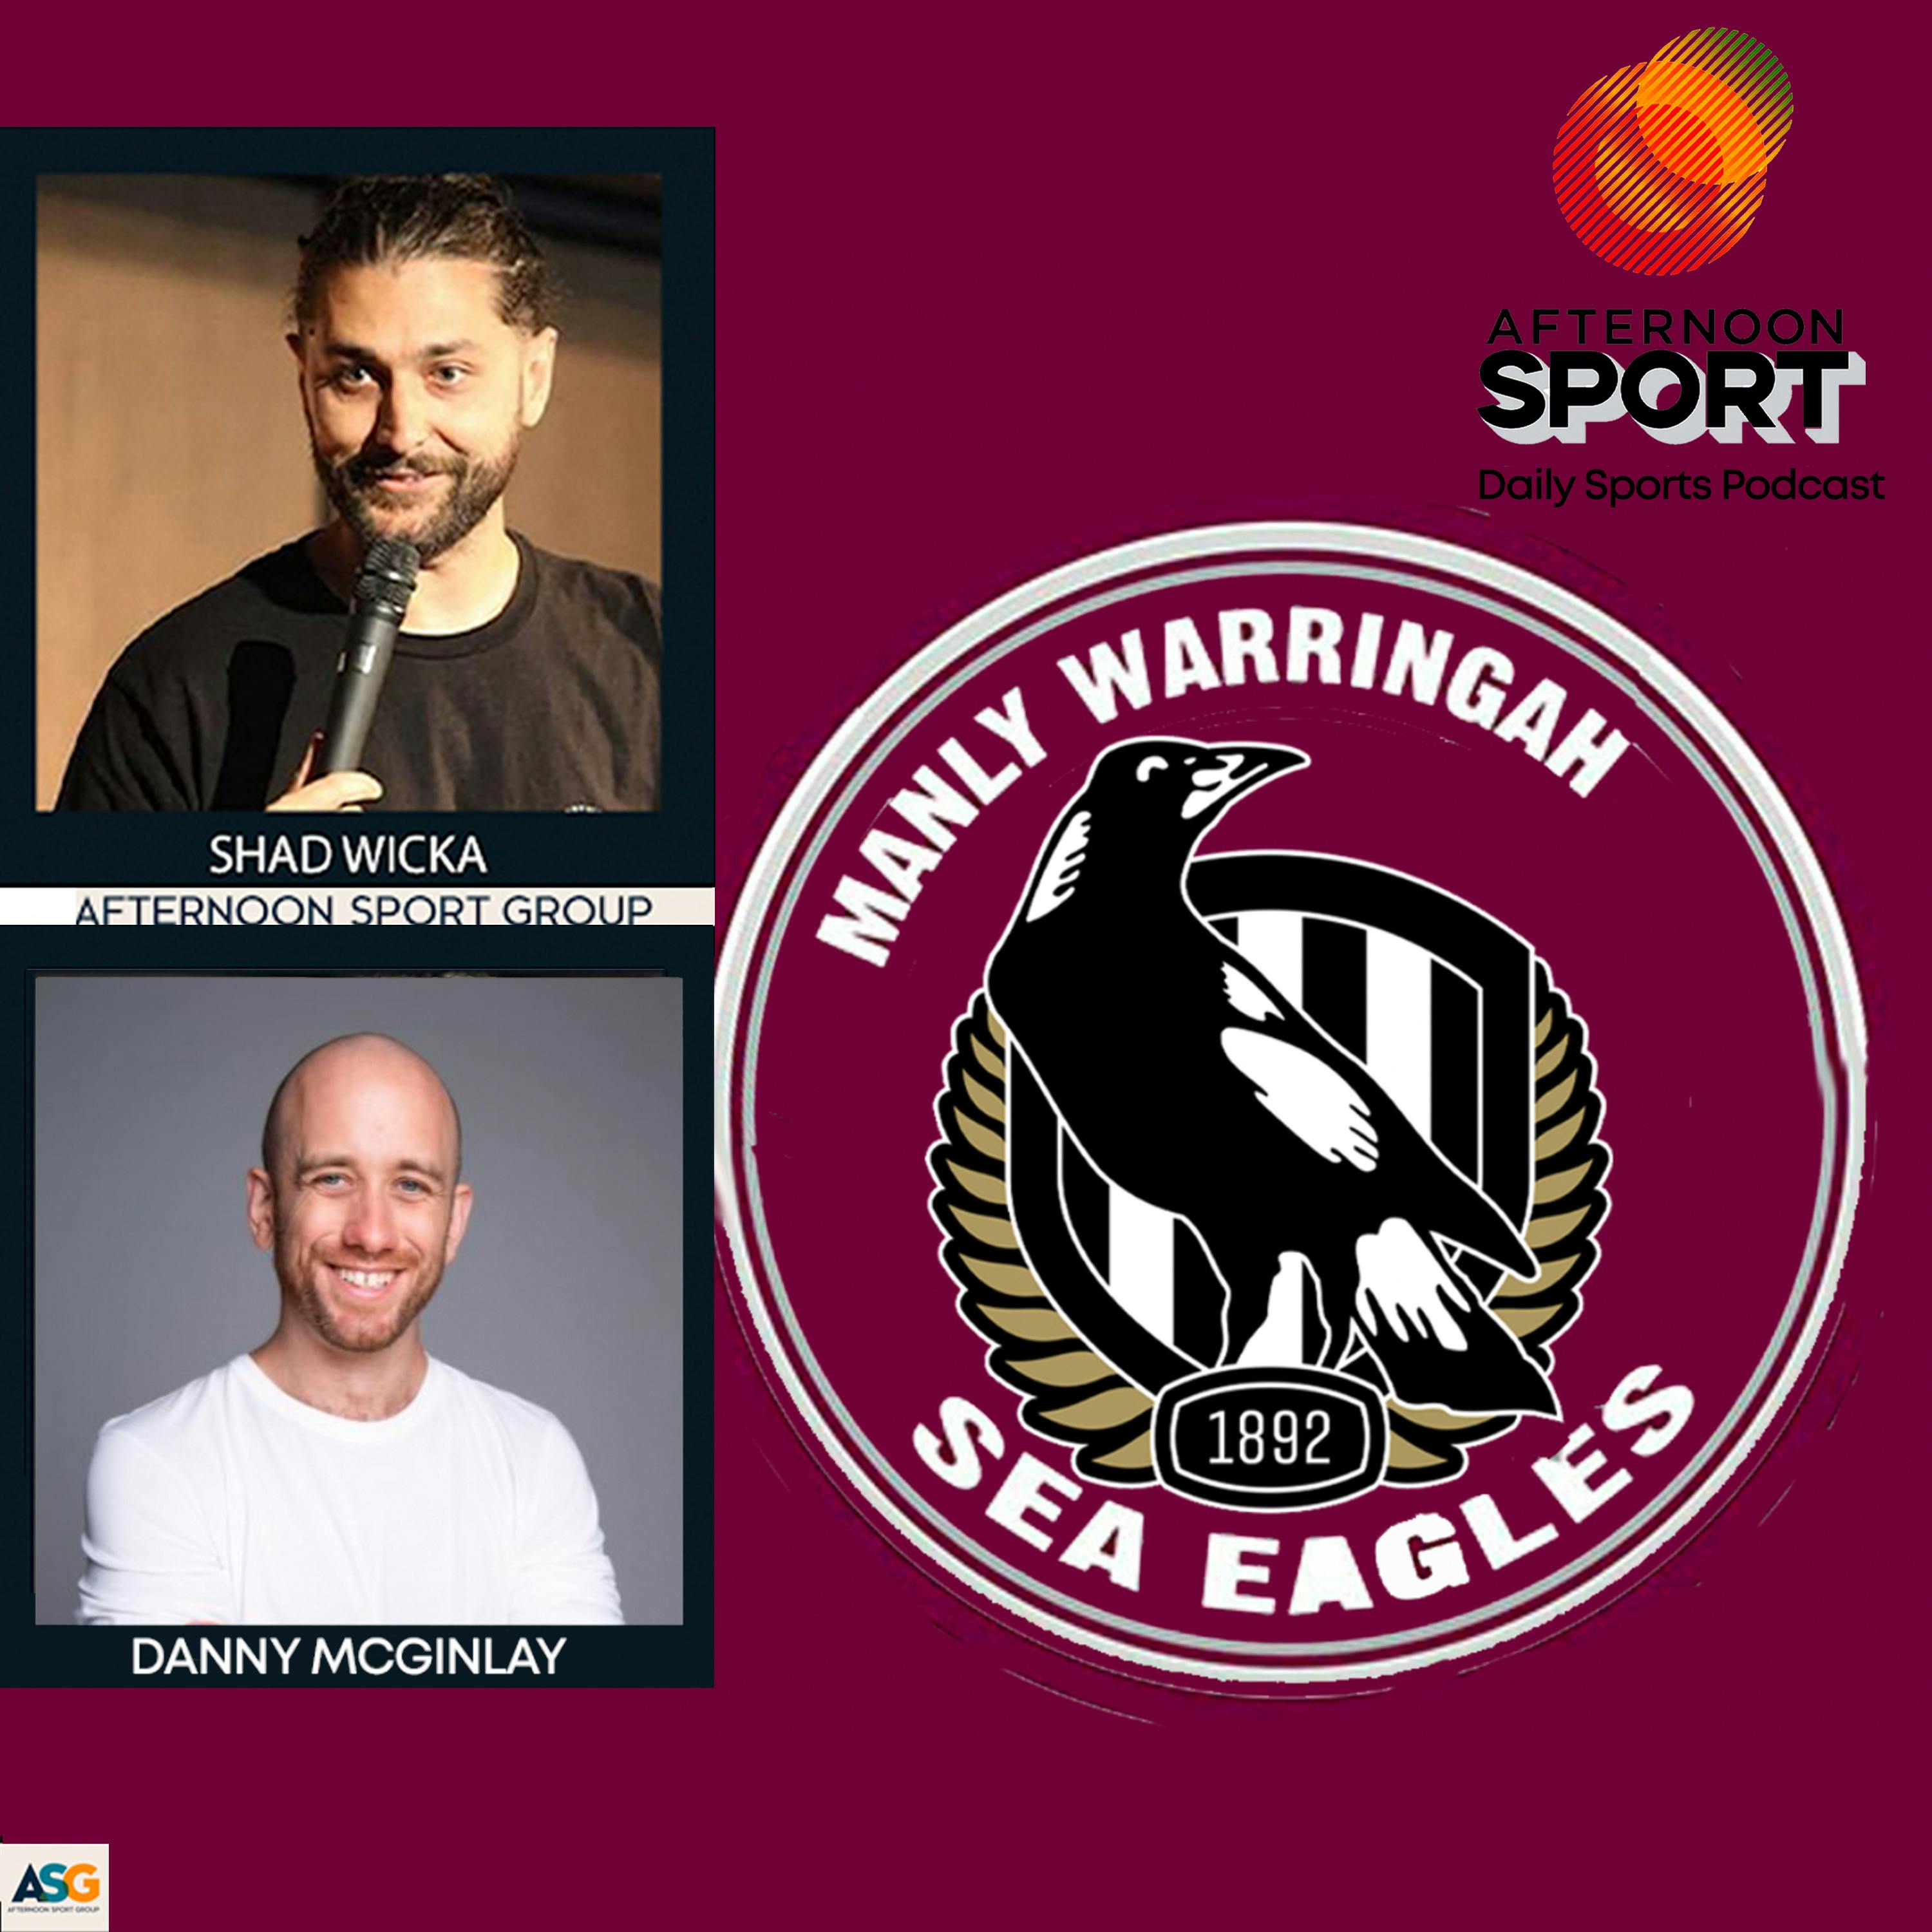 27th June Shad Wicka and Danny McGinlay: Women Ashes are ours, Hollywood buys into sport, AFL conspiracy, Manly are the Collingwood of NRL + more!